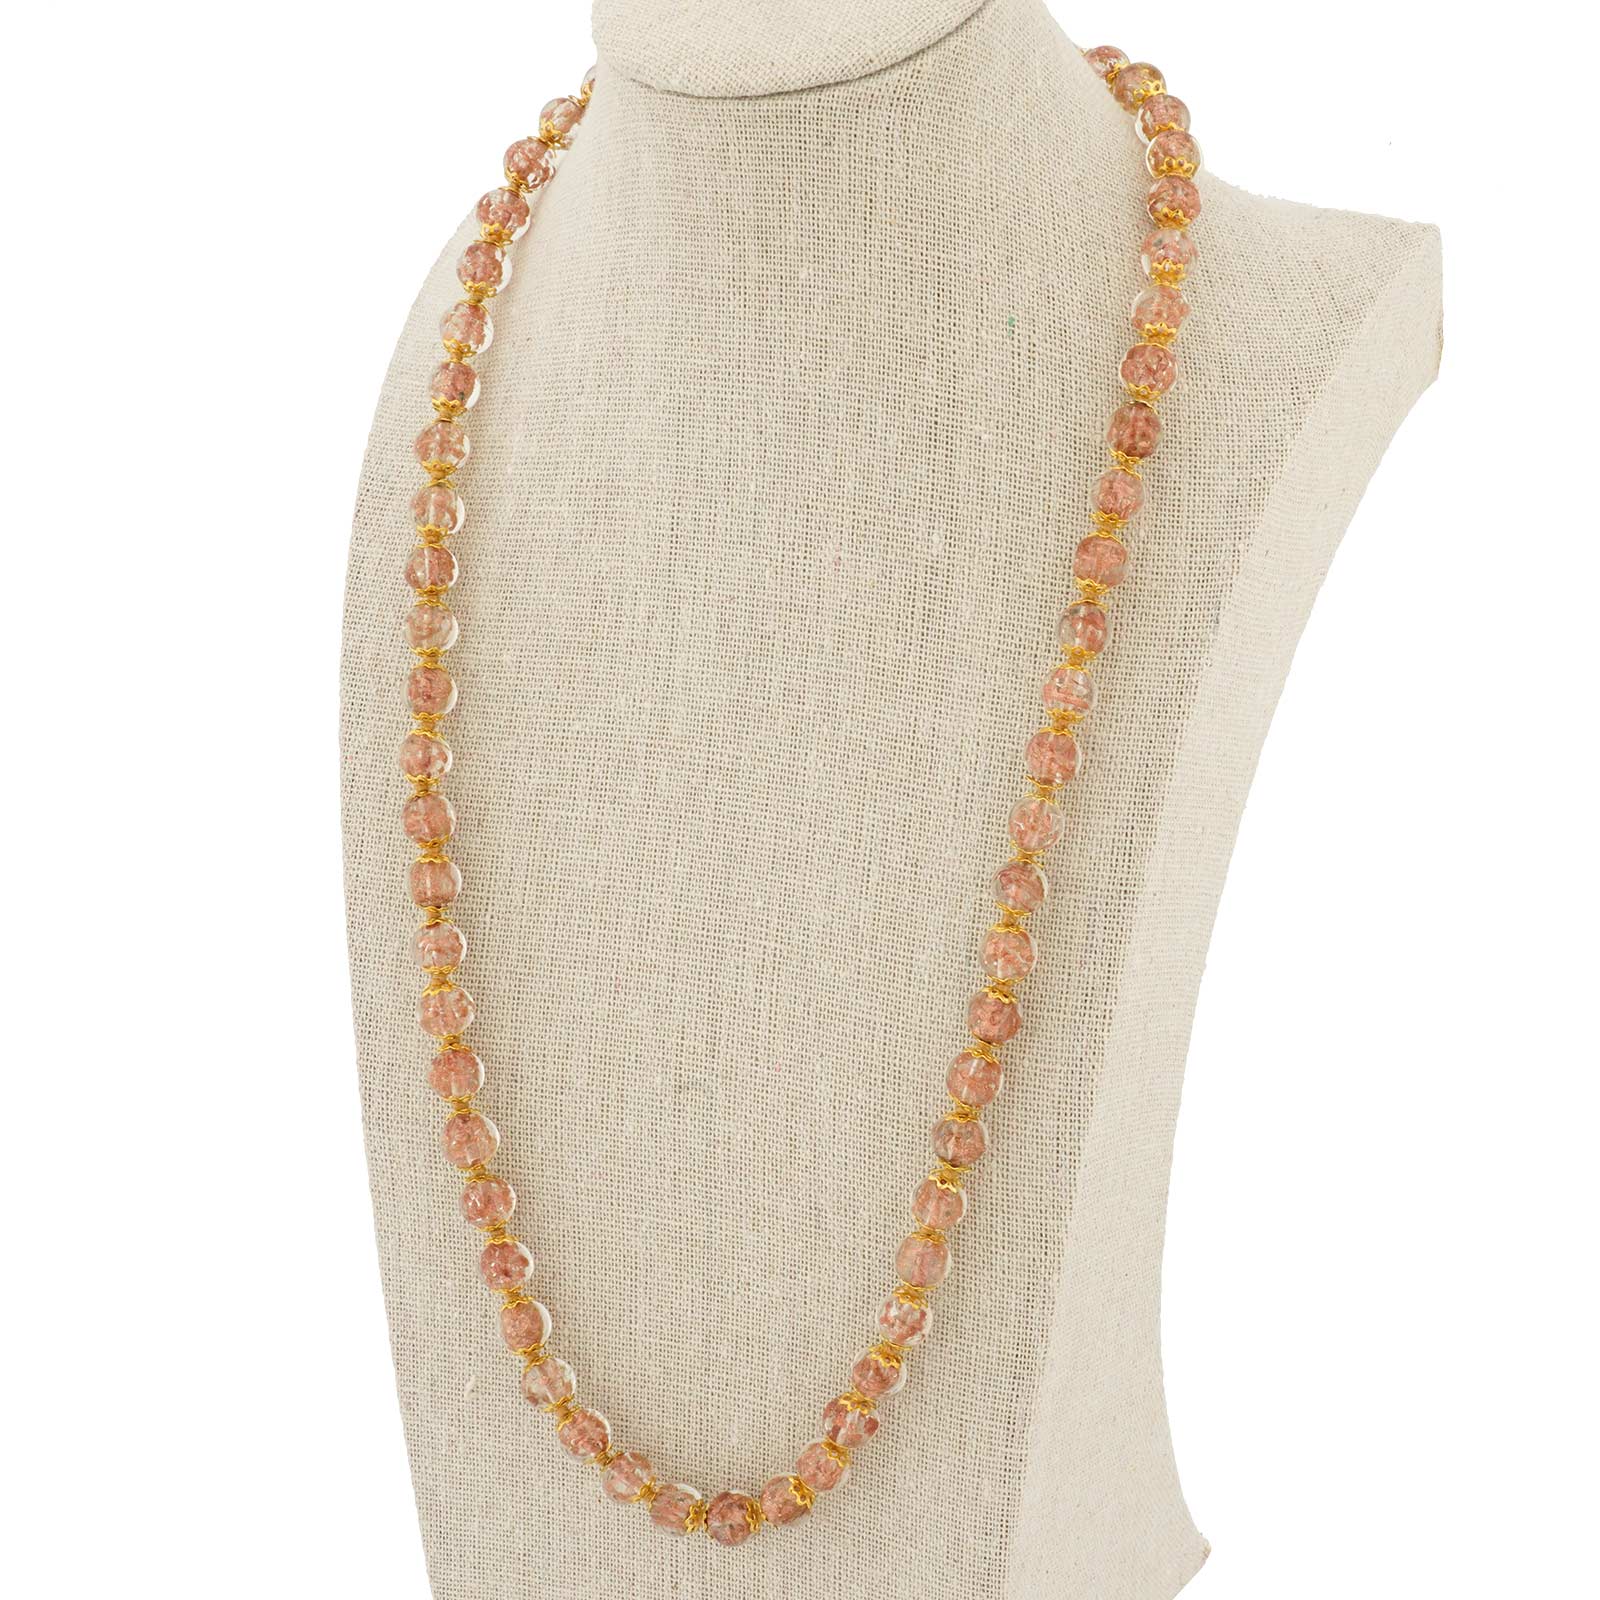 Murano Necklaces | Sommerso Long Murano Necklace - Champagne